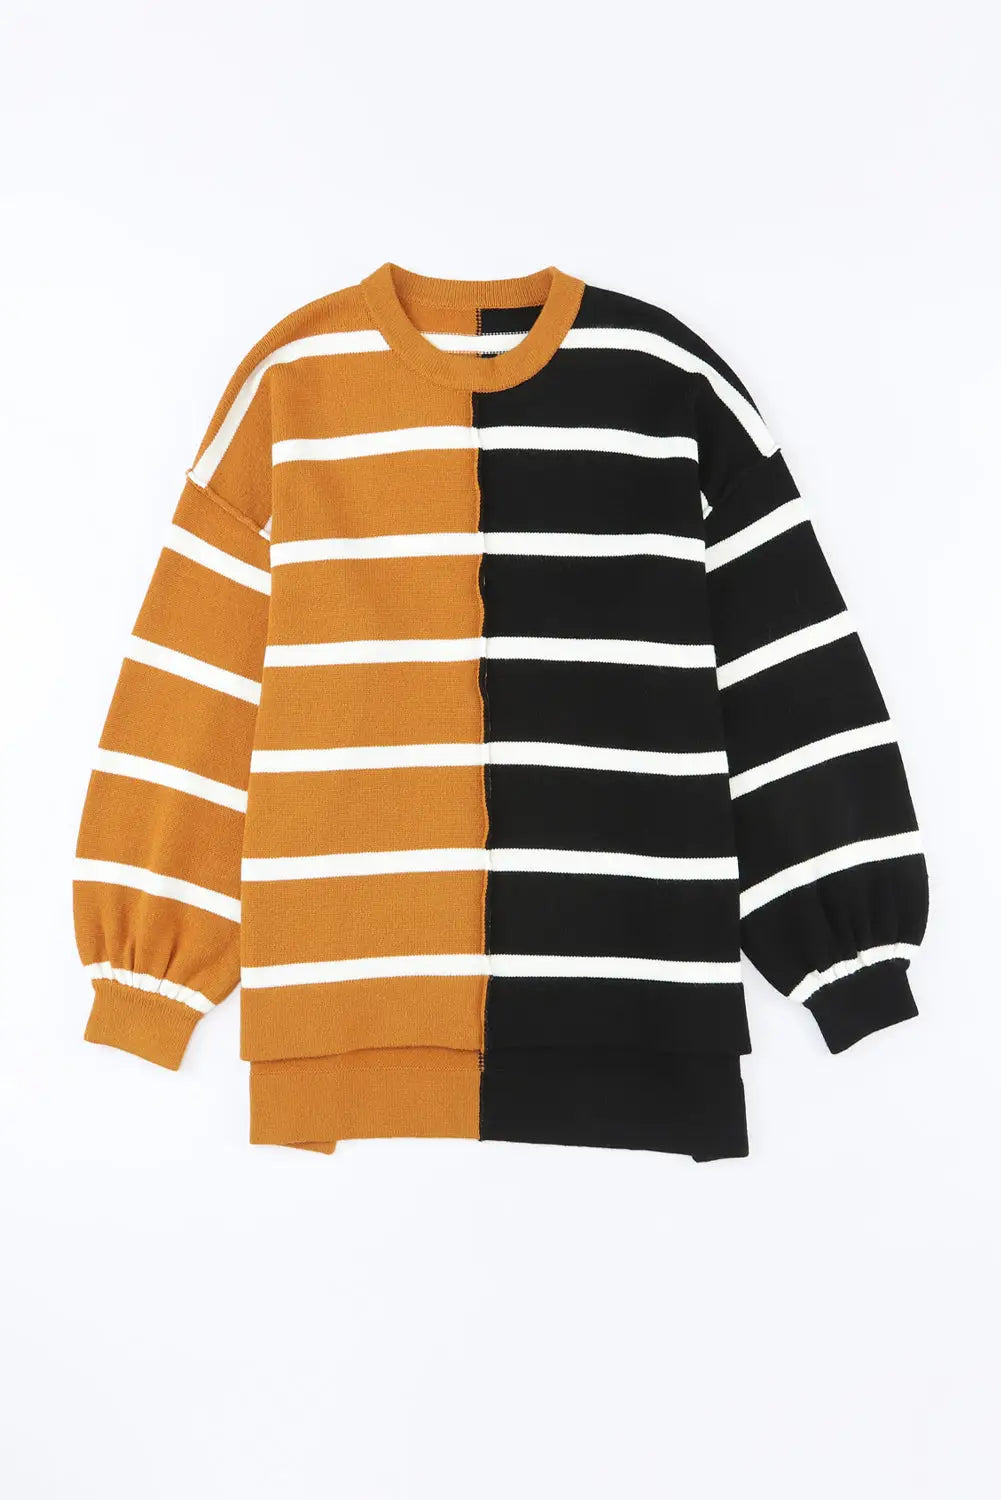 Stripe oversized contrast printed dropped shoulder top - long sleeve tops